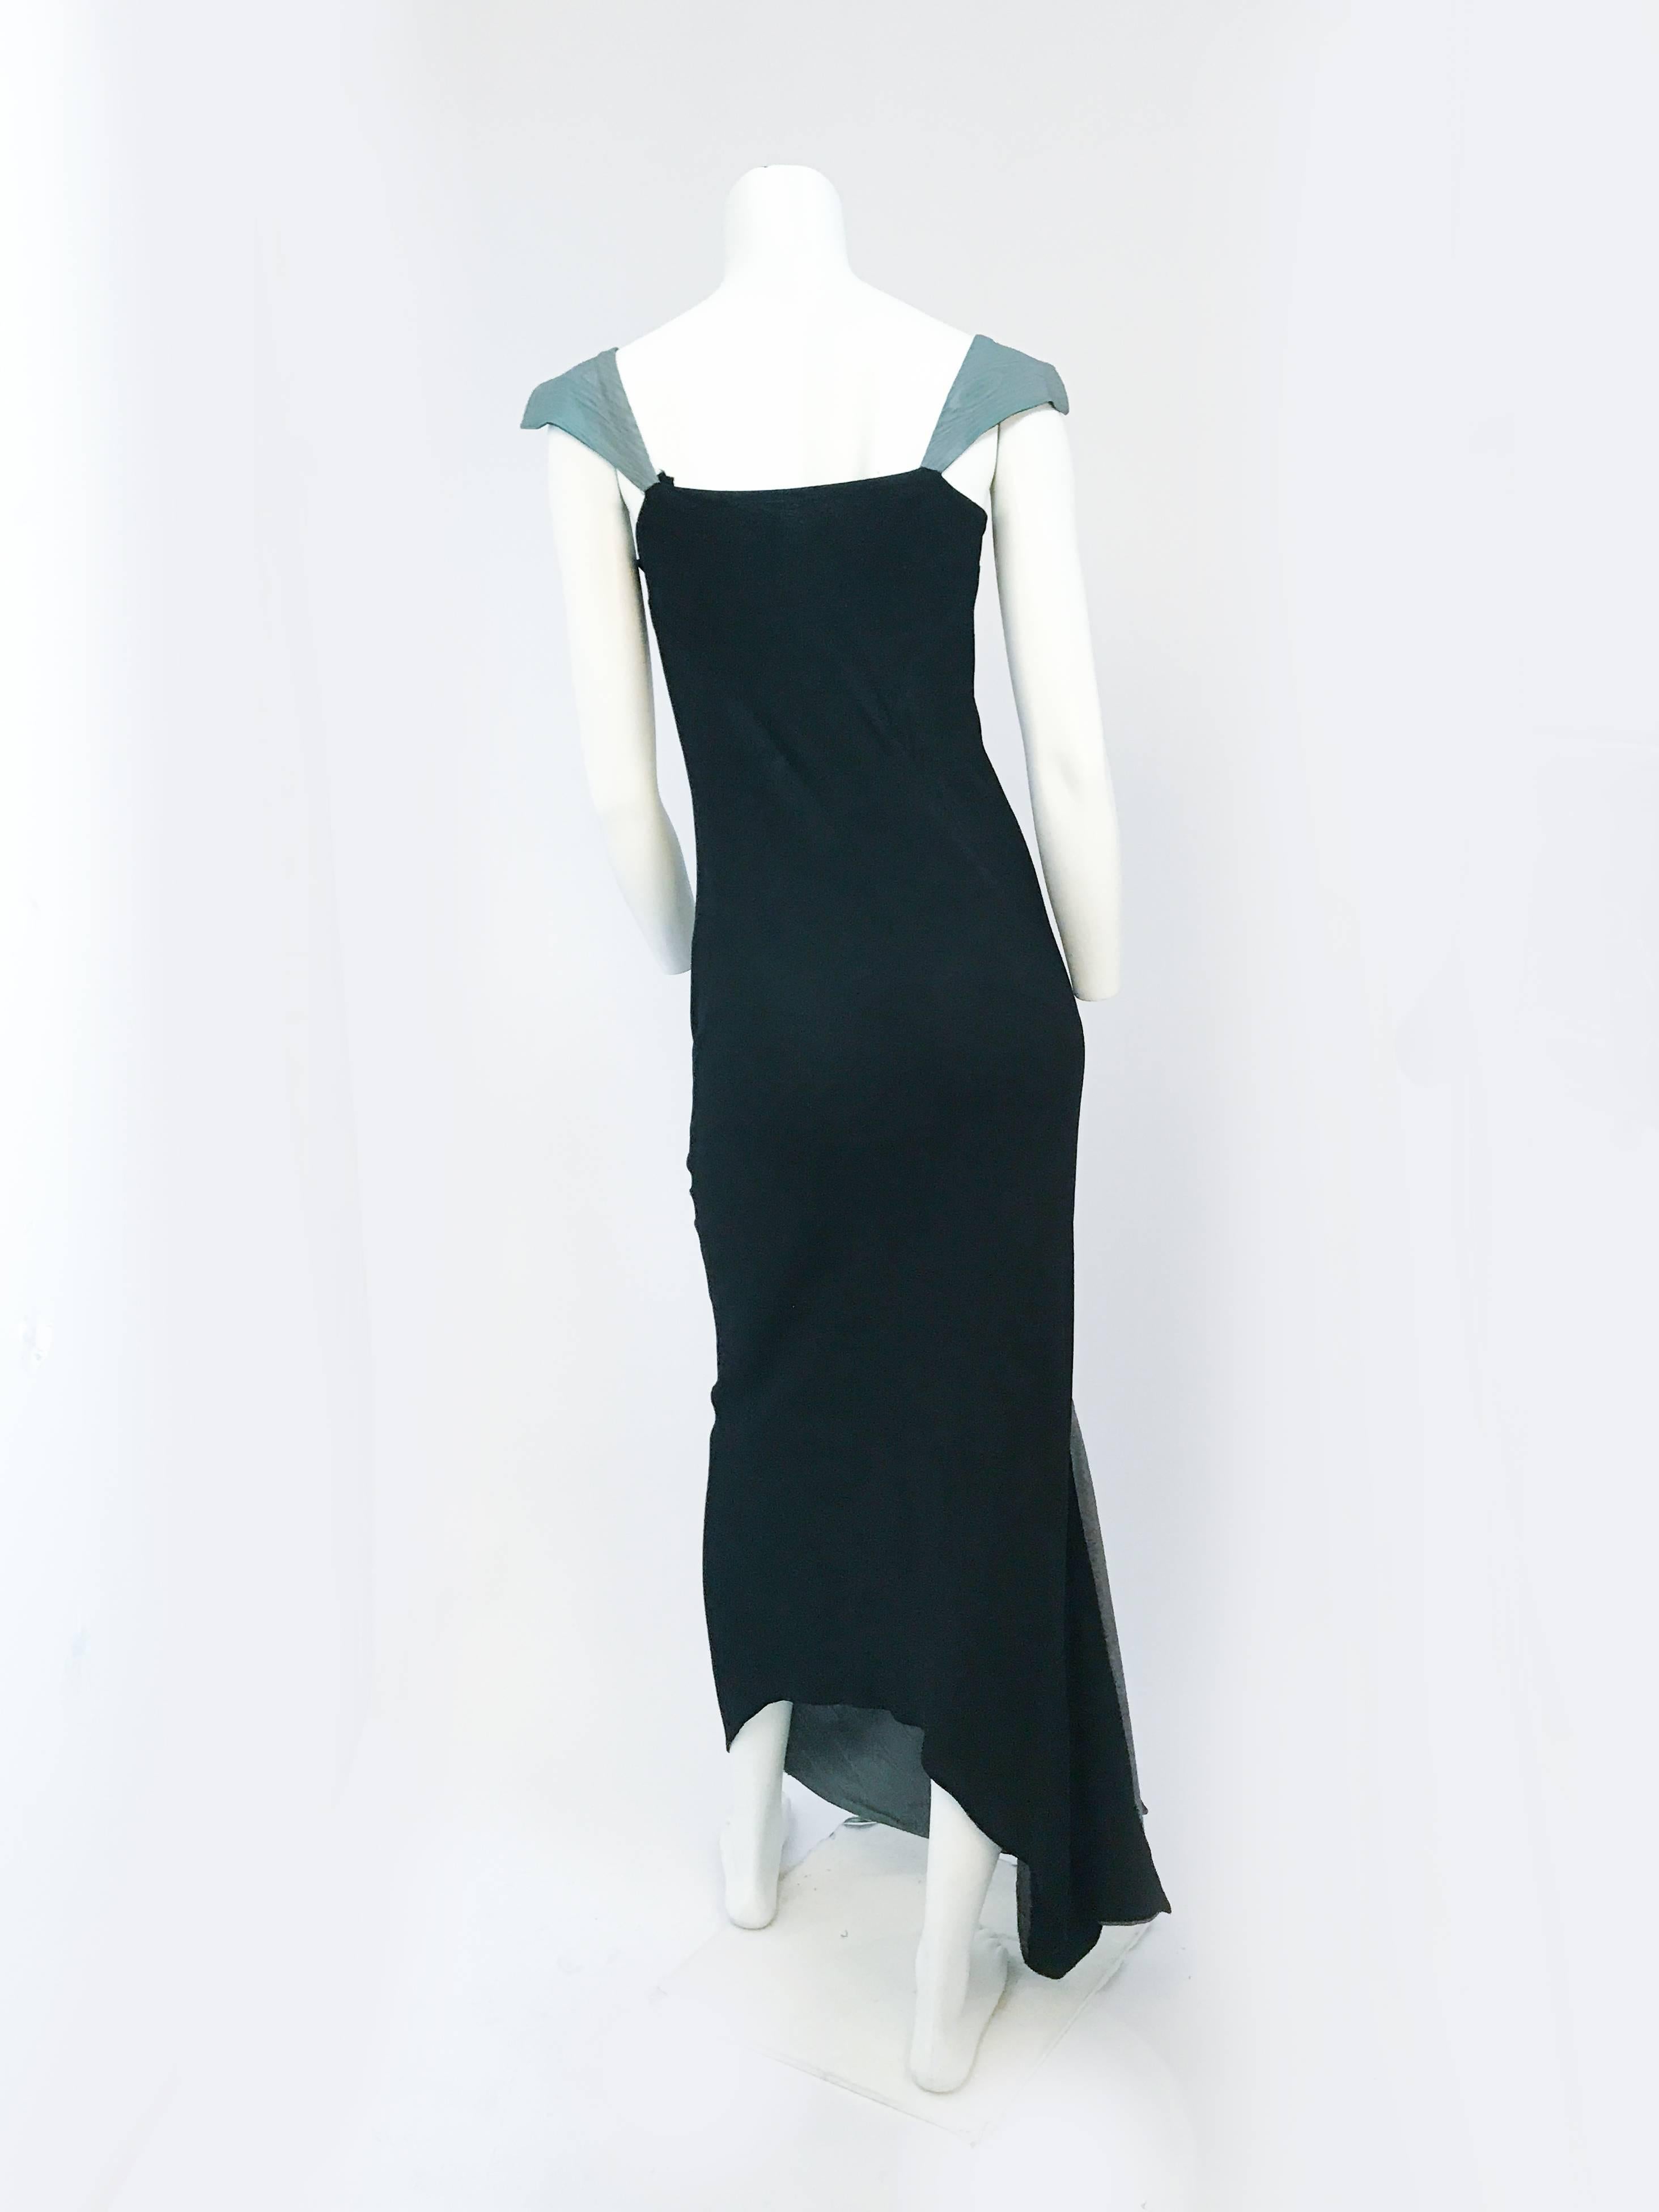 1930s Black Bias Cut Crepe Dress With Green Moire Details For Sale 1